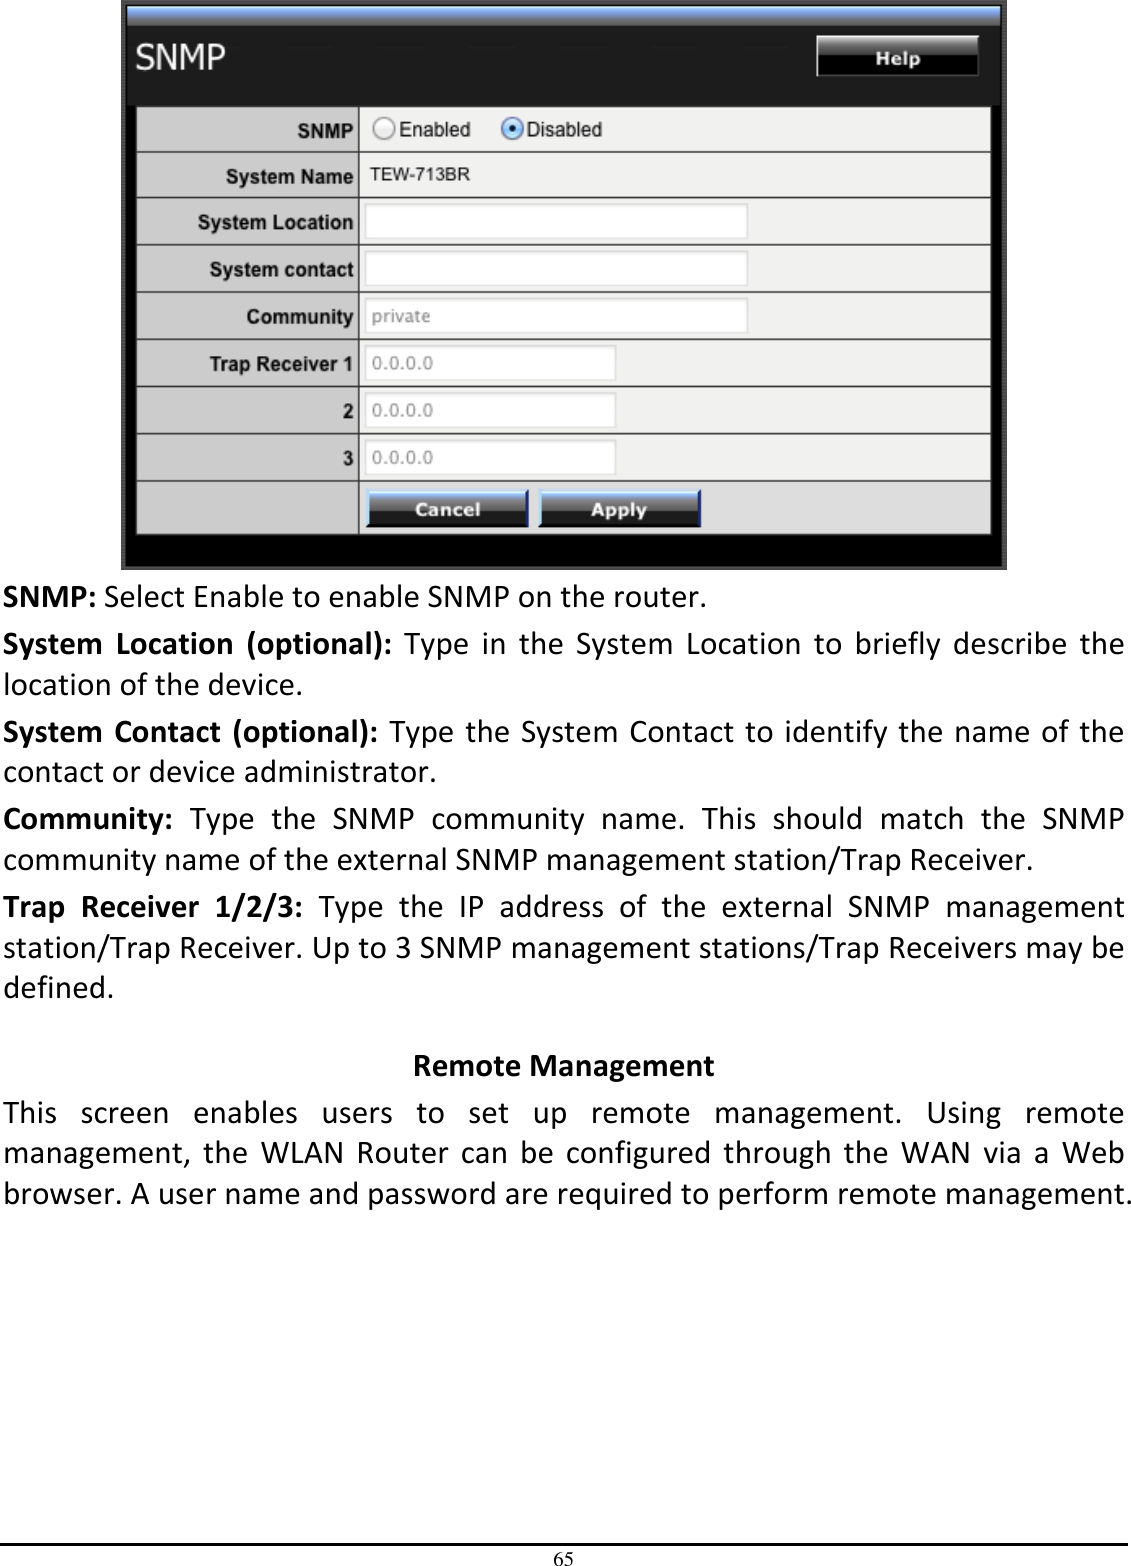 65  SNMP: Select Enable to enable SNMP on the router. System  Location  (optional):  Type  in  the  System  Location  to  briefly  describe  the location of the device.  System Contact  (optional): Type the System Contact to identify the name of the contact or device administrator. Community:  Type  the  SNMP  community  name.  This  should  match  the  SNMP community name of the external SNMP management station/Trap Receiver. Trap  Receiver  1/2/3:  Type  the  IP  address  of  the  external  SNMP  management station/Trap Receiver. Up to 3 SNMP management stations/Trap Receivers may be defined.  Remote Management This  screen  enables  users  to  set  up  remote  management.  Using  remote management,  the WLAN  Router  can be configured  through  the  WAN  via a Web browser. A user name and password are required to perform remote management. 